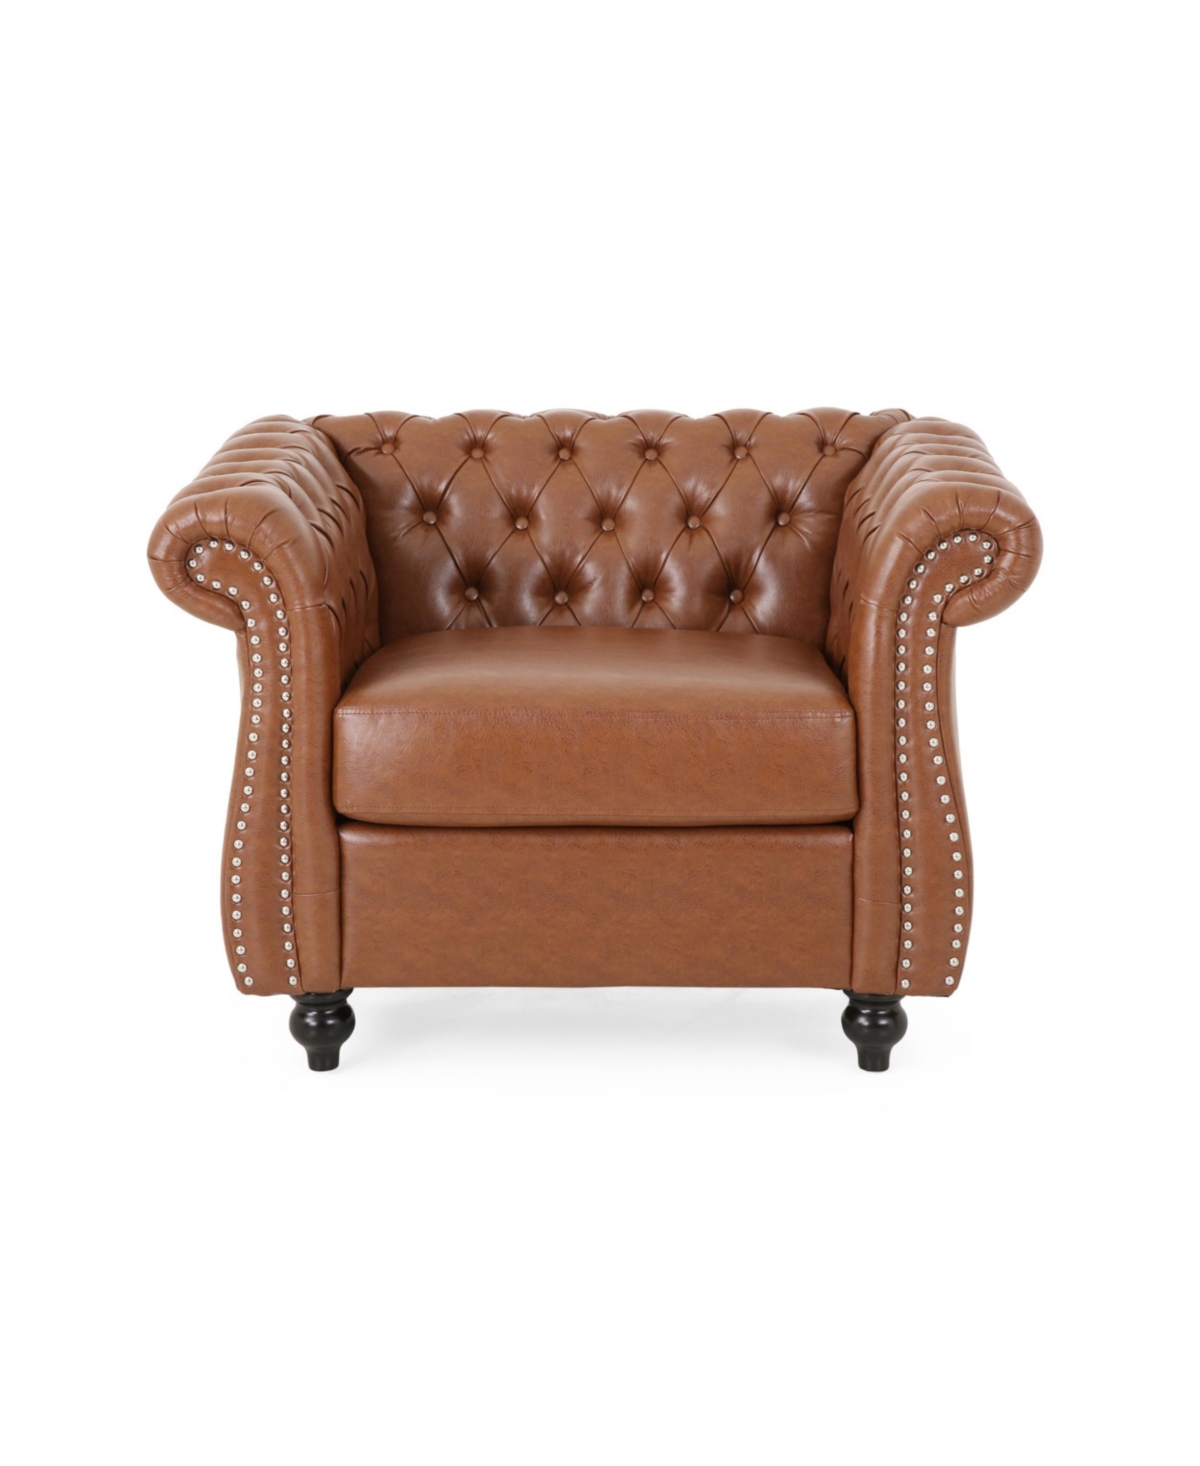 Noble House Silverdale Traditional Chesterfield Club Chair In Cognac Brown